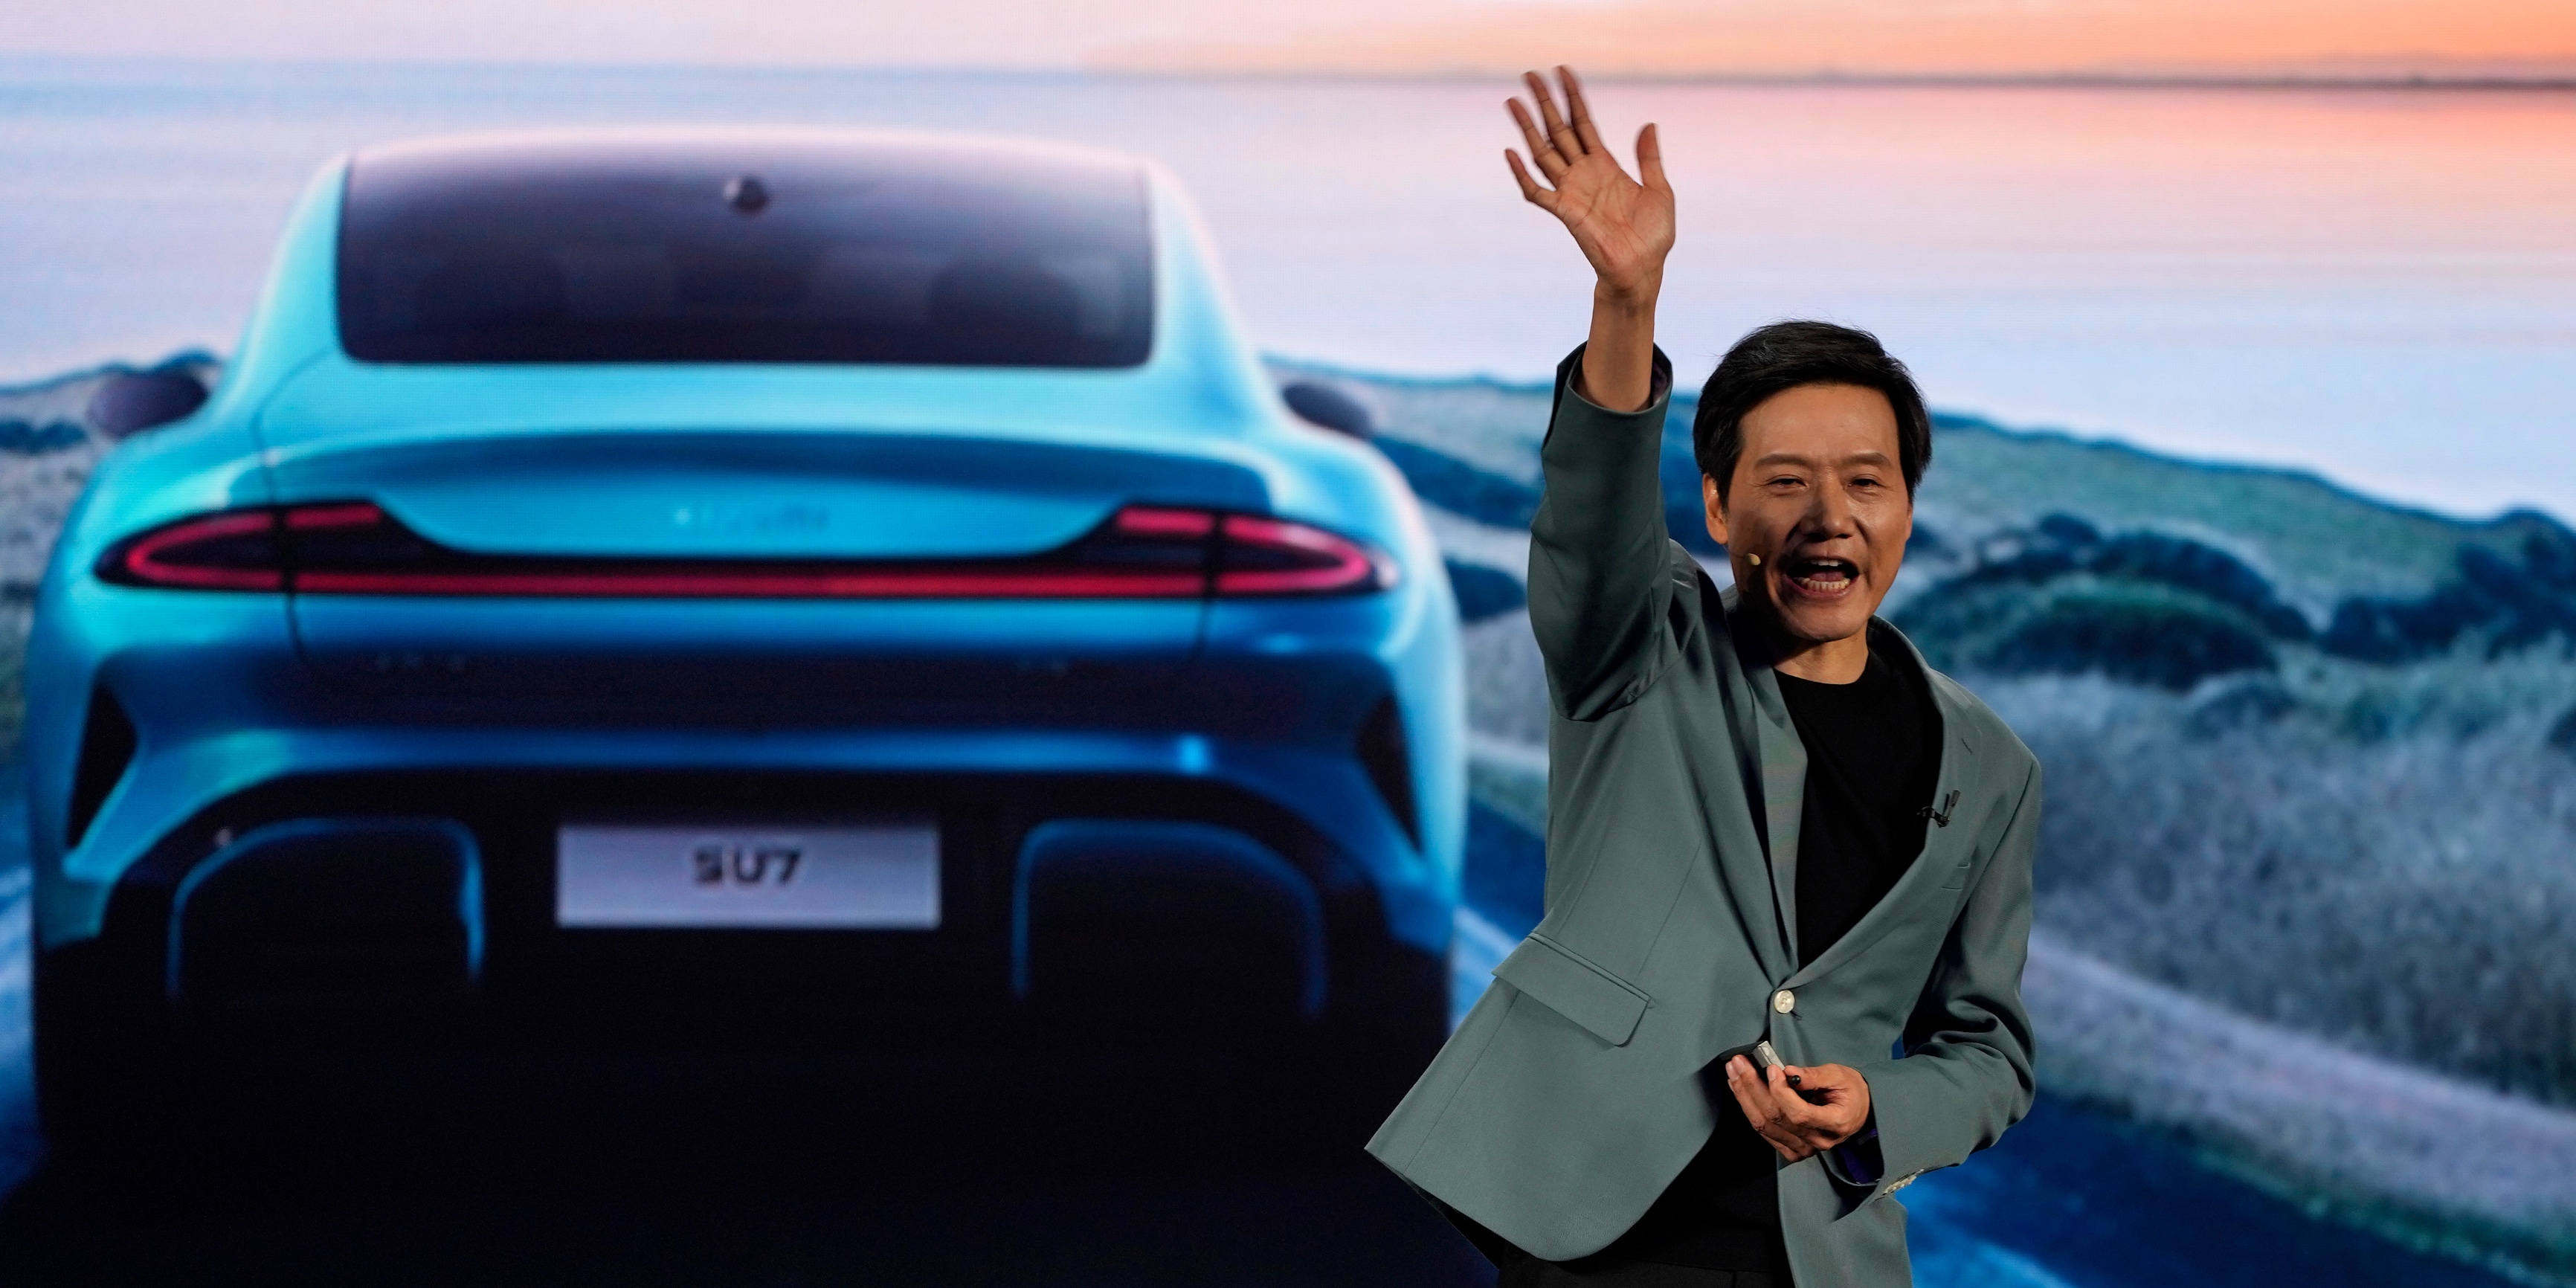 tesla and mercedes sidestepped - xiaomi su7 becomes china's new electric car crush!